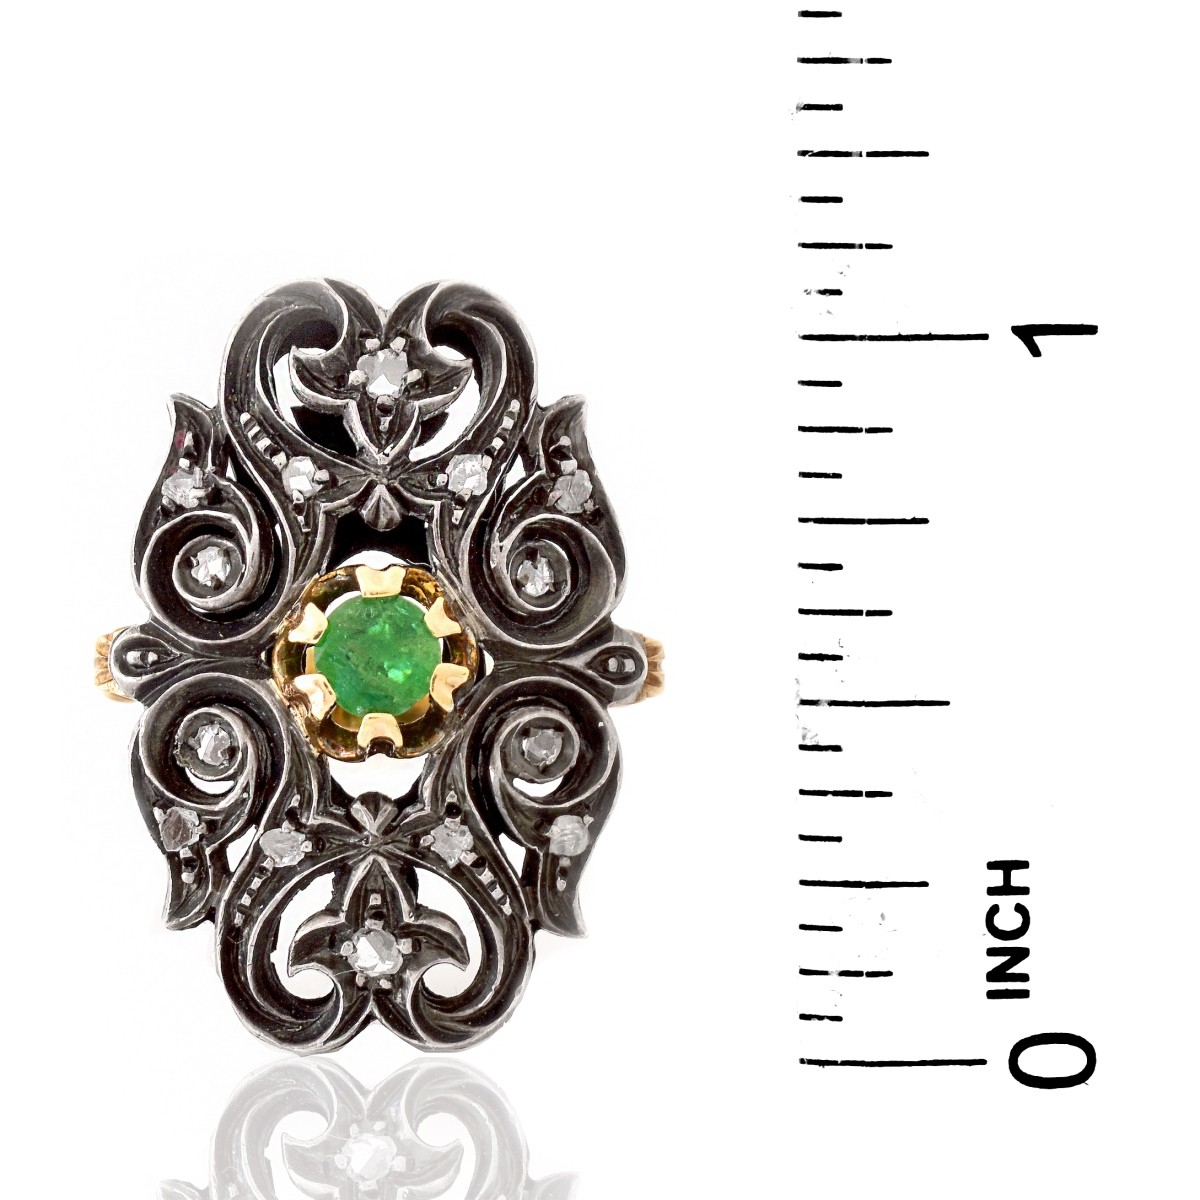 Antique 14K Gold, Silver and Emerald Ring